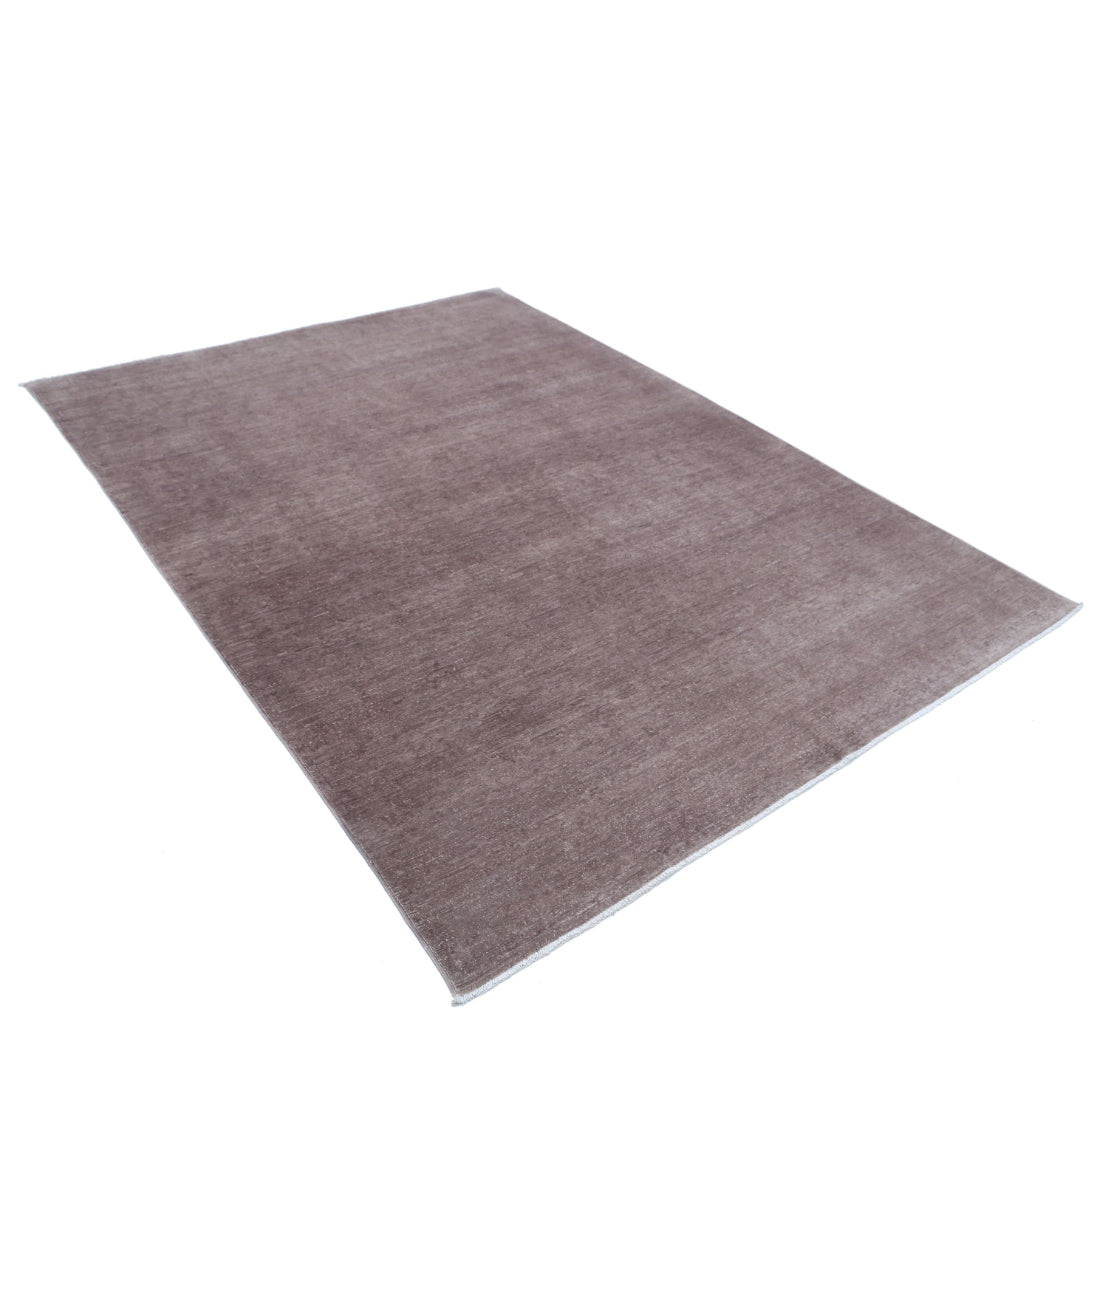 Hand Knotted Overdye Wool Rug - 6'1'' x 8'4'' 6'1'' x 8'4'' (183 X 250) / Taupe / Taupe